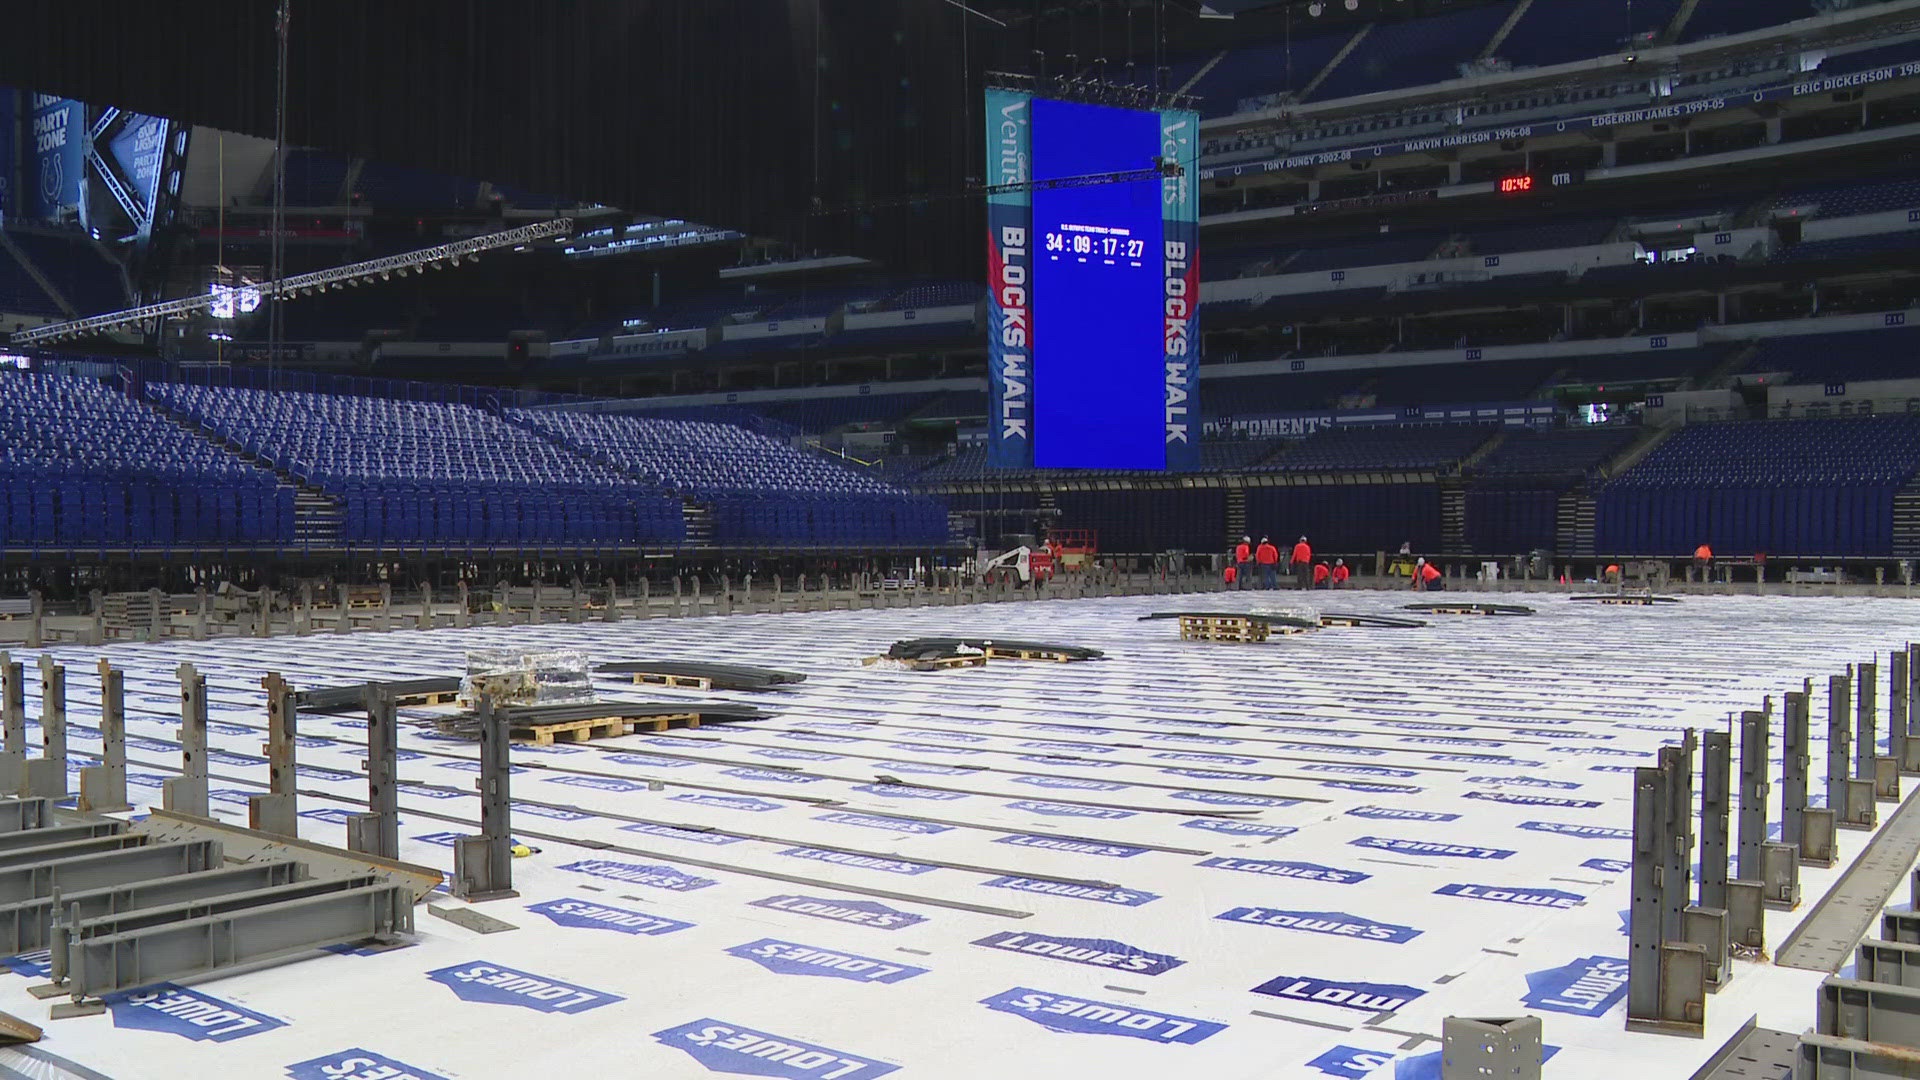 Crews have been installing LED lighting in the ceiling at Lucas Oil. Then workers will build the pools and deck and install plumbing and a filtration system.